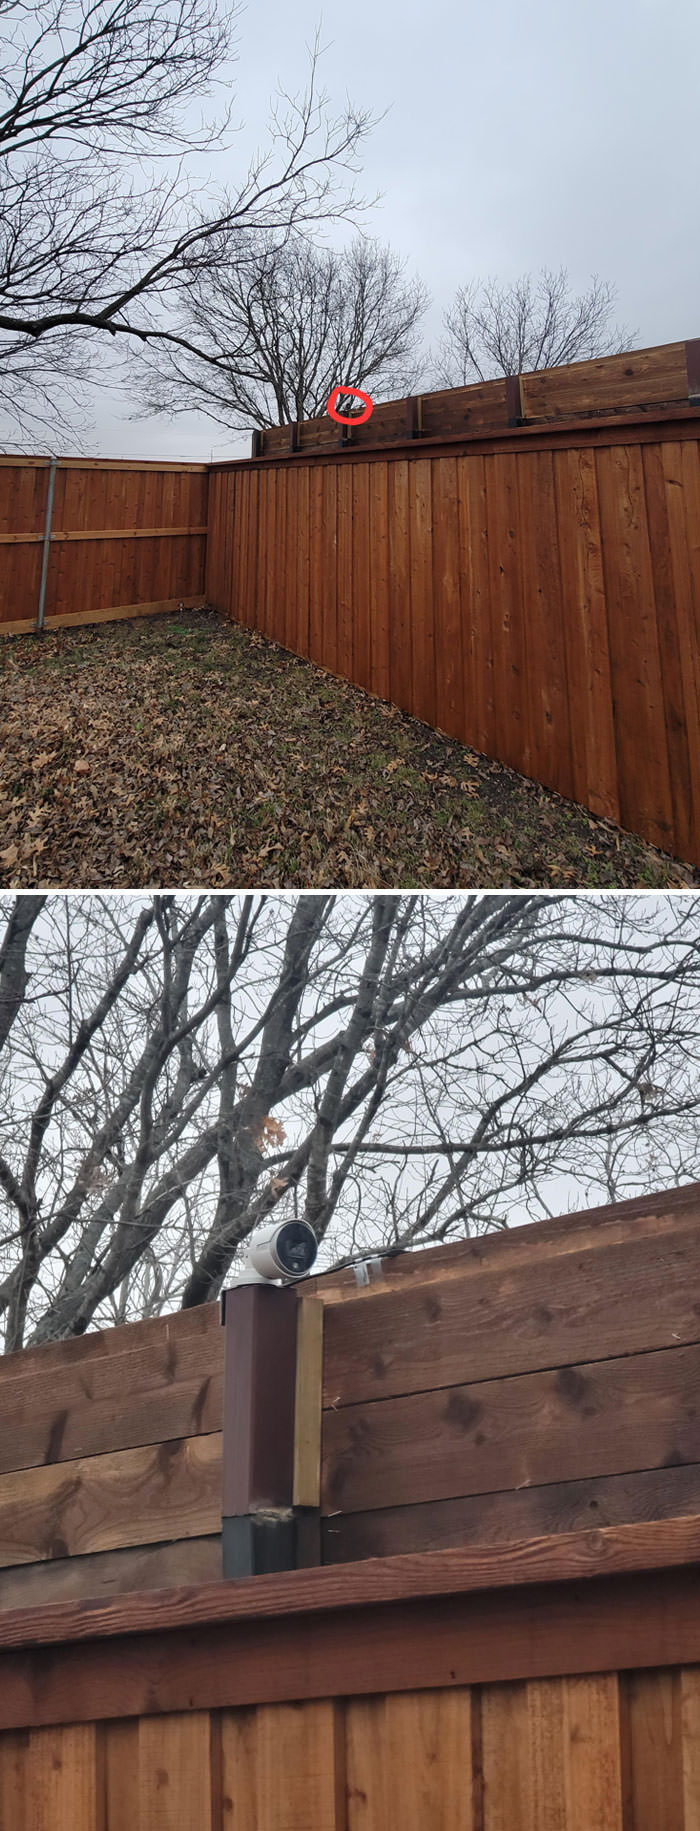 Built a 7-foot privacy fence. Neighbor raised his by 2 feet and put a camera facing into my backyard. I've been having problems with this neighbor since they moved in years ago.